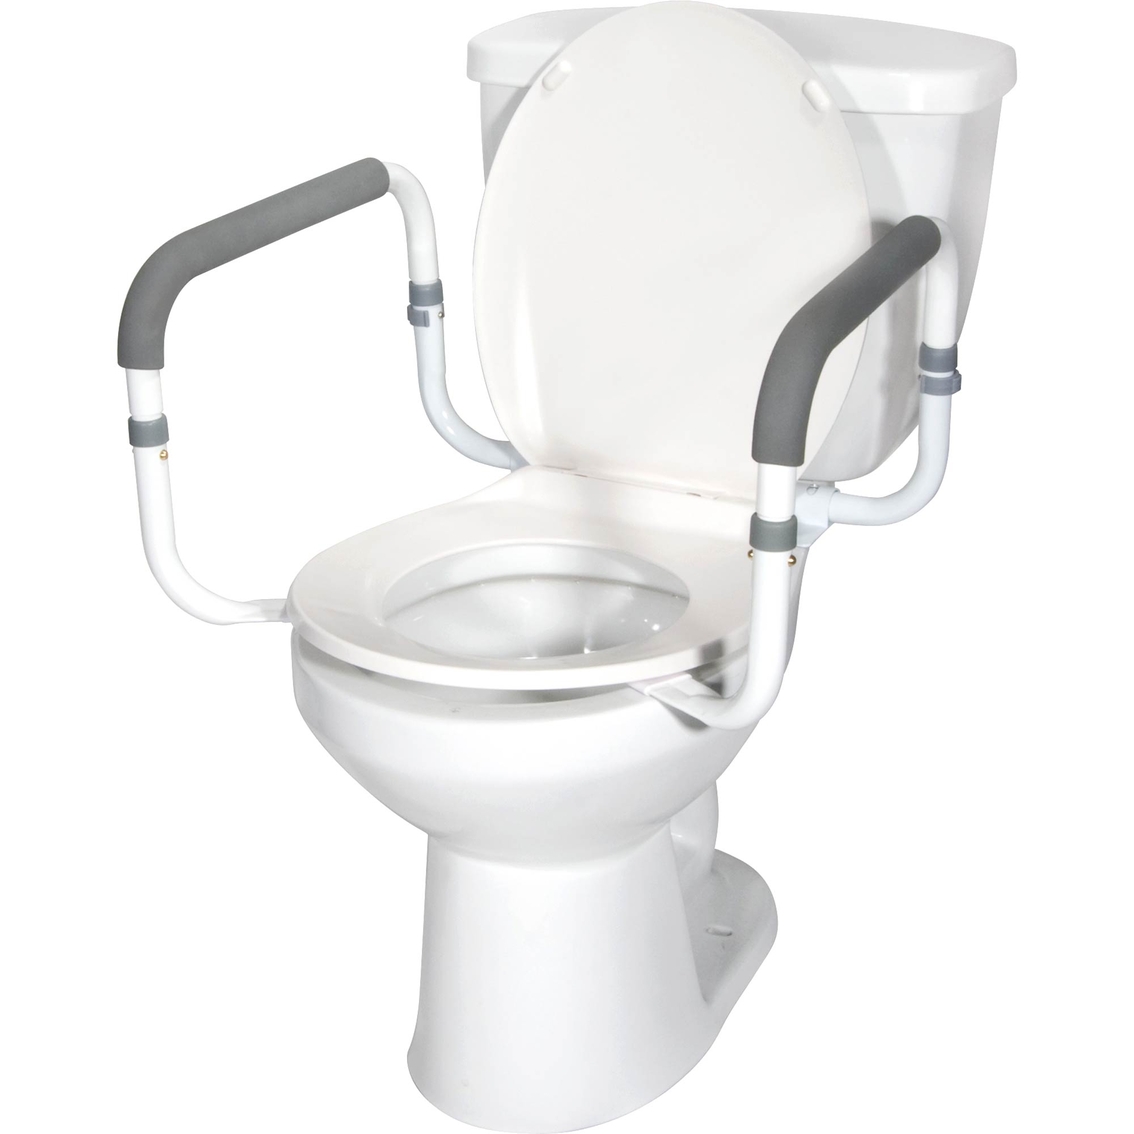 Drive Medical Toilet Safety Rail - Image 2 of 2